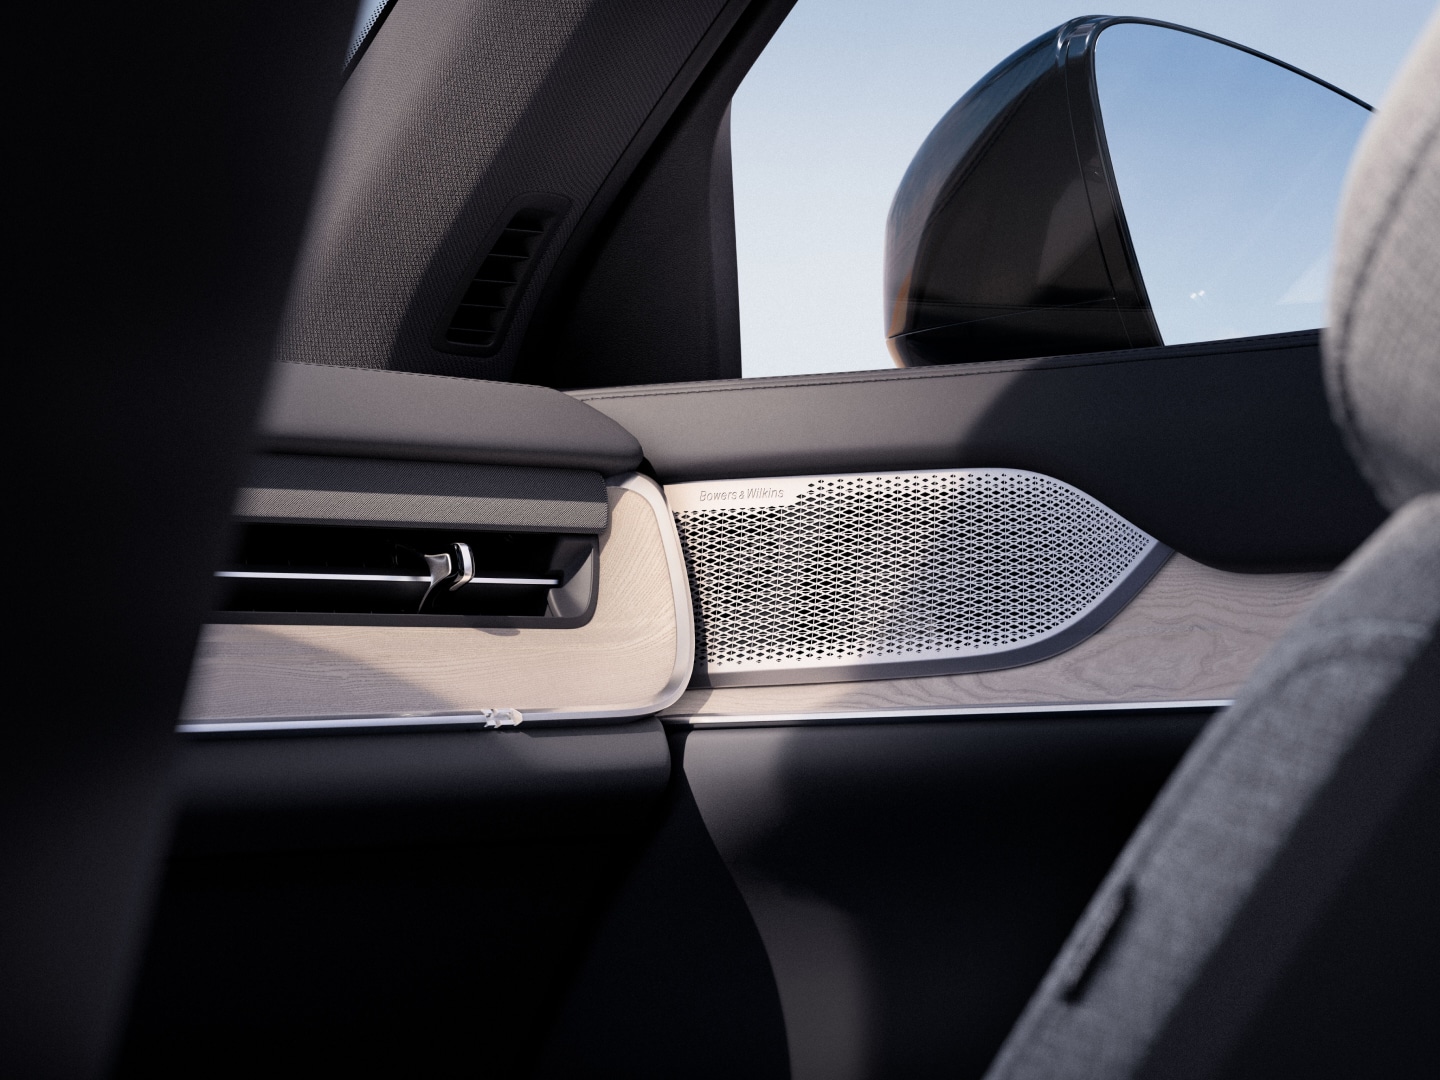 Bowers & Wilkins stainless steel speaker grilles in the cabin of a Volvo EX90.